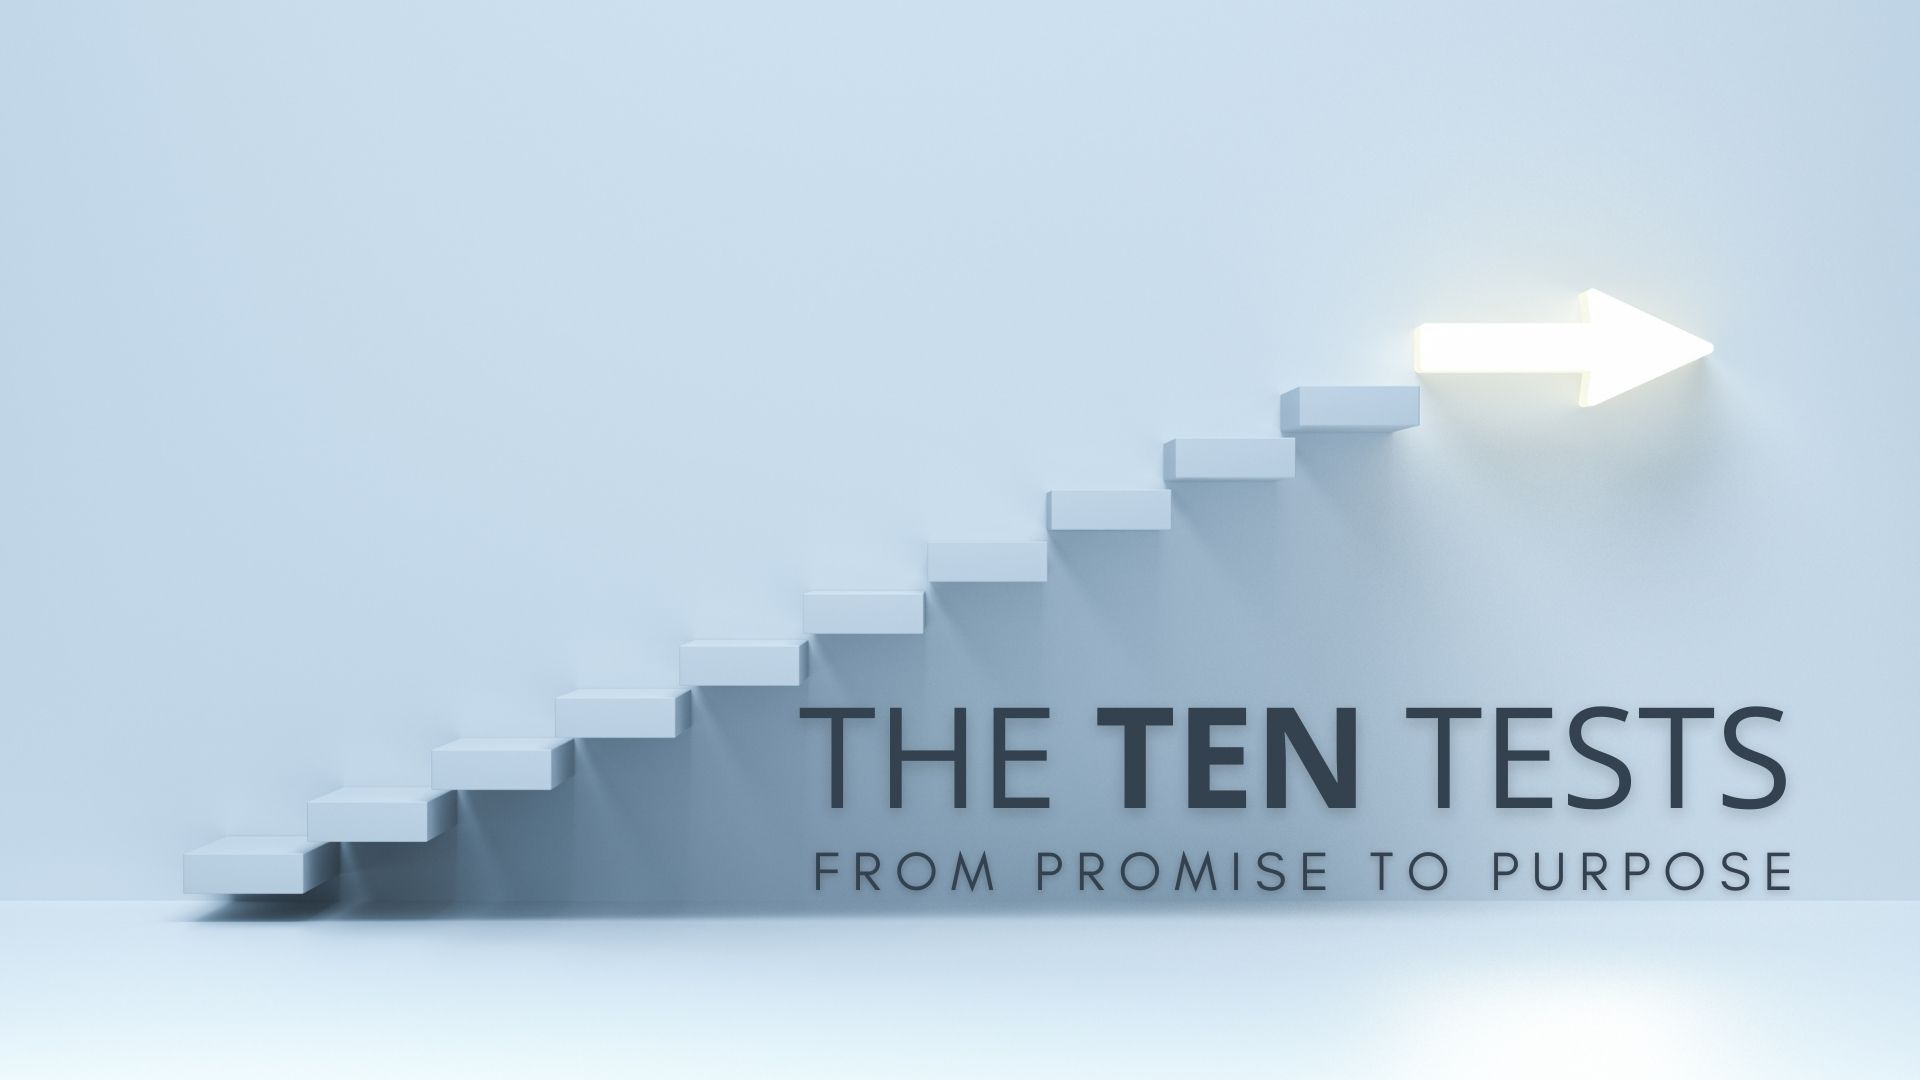 The TEN Tests: From Promise to Purpose - The Prophetic Test